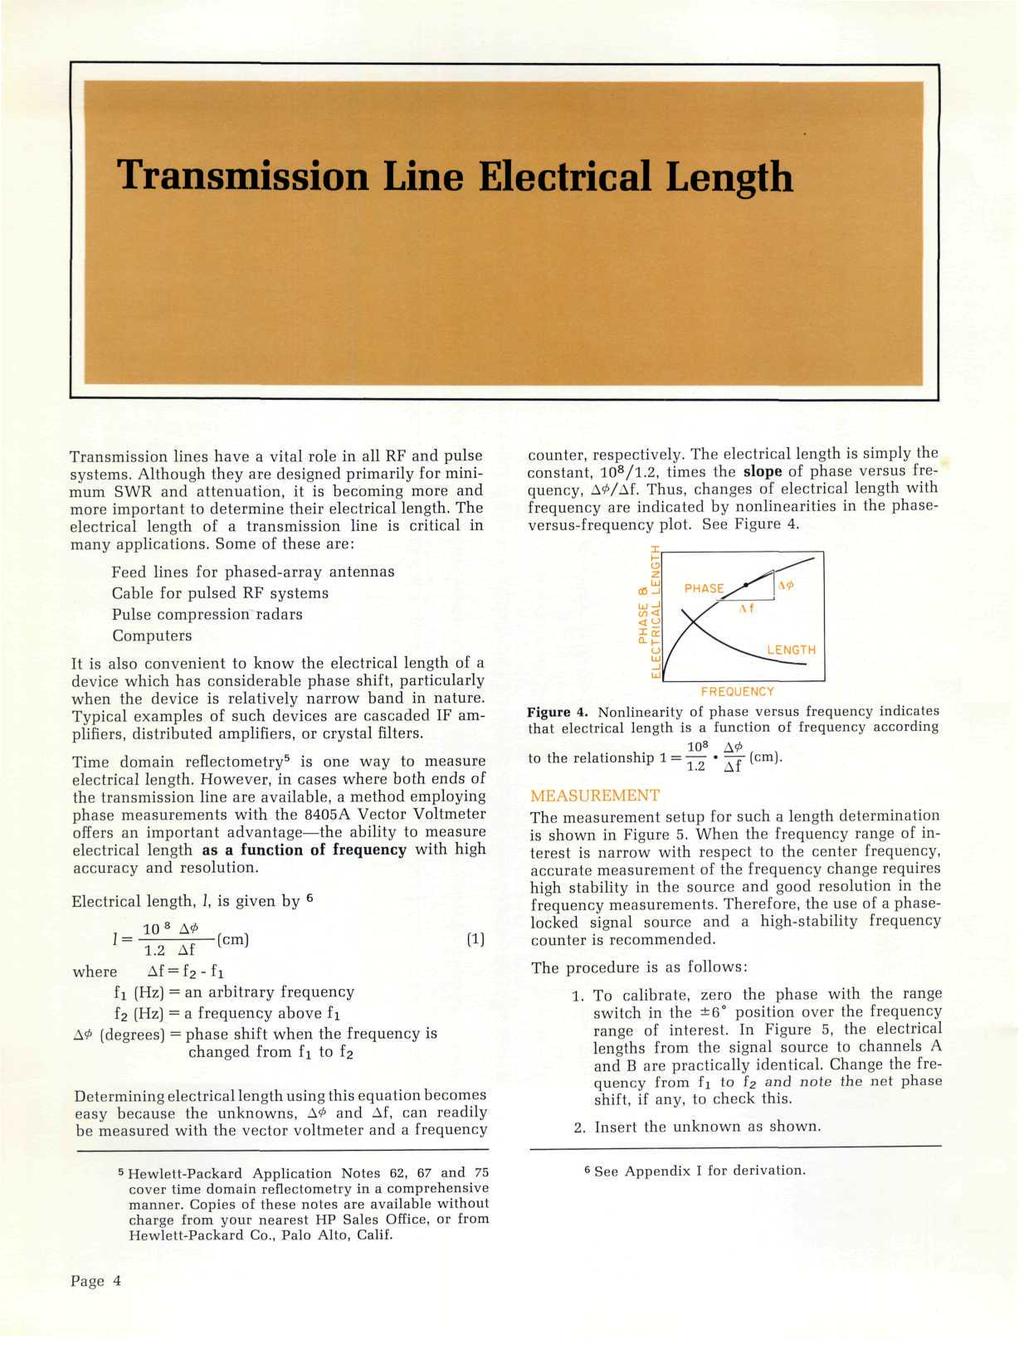 Transmission Line Electrical Length Transmission lines have a vital role in all RF and pulse systems.